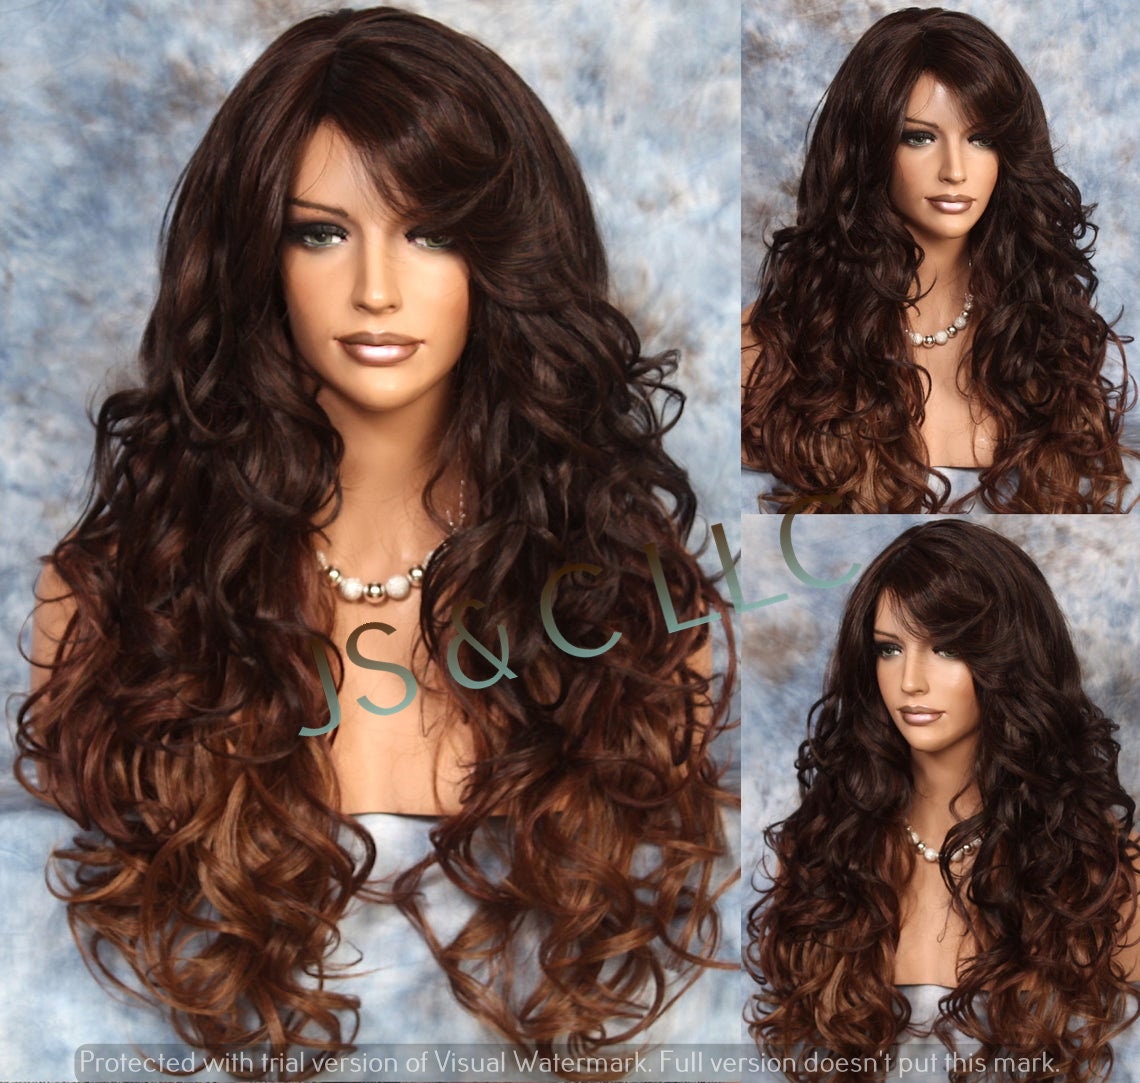 Beautiful Human Hair Blend Brown Auburn Tip Mix Long Full Wig With Curls & Bangs Side Parting Cancer/Alopecia/Cosplay